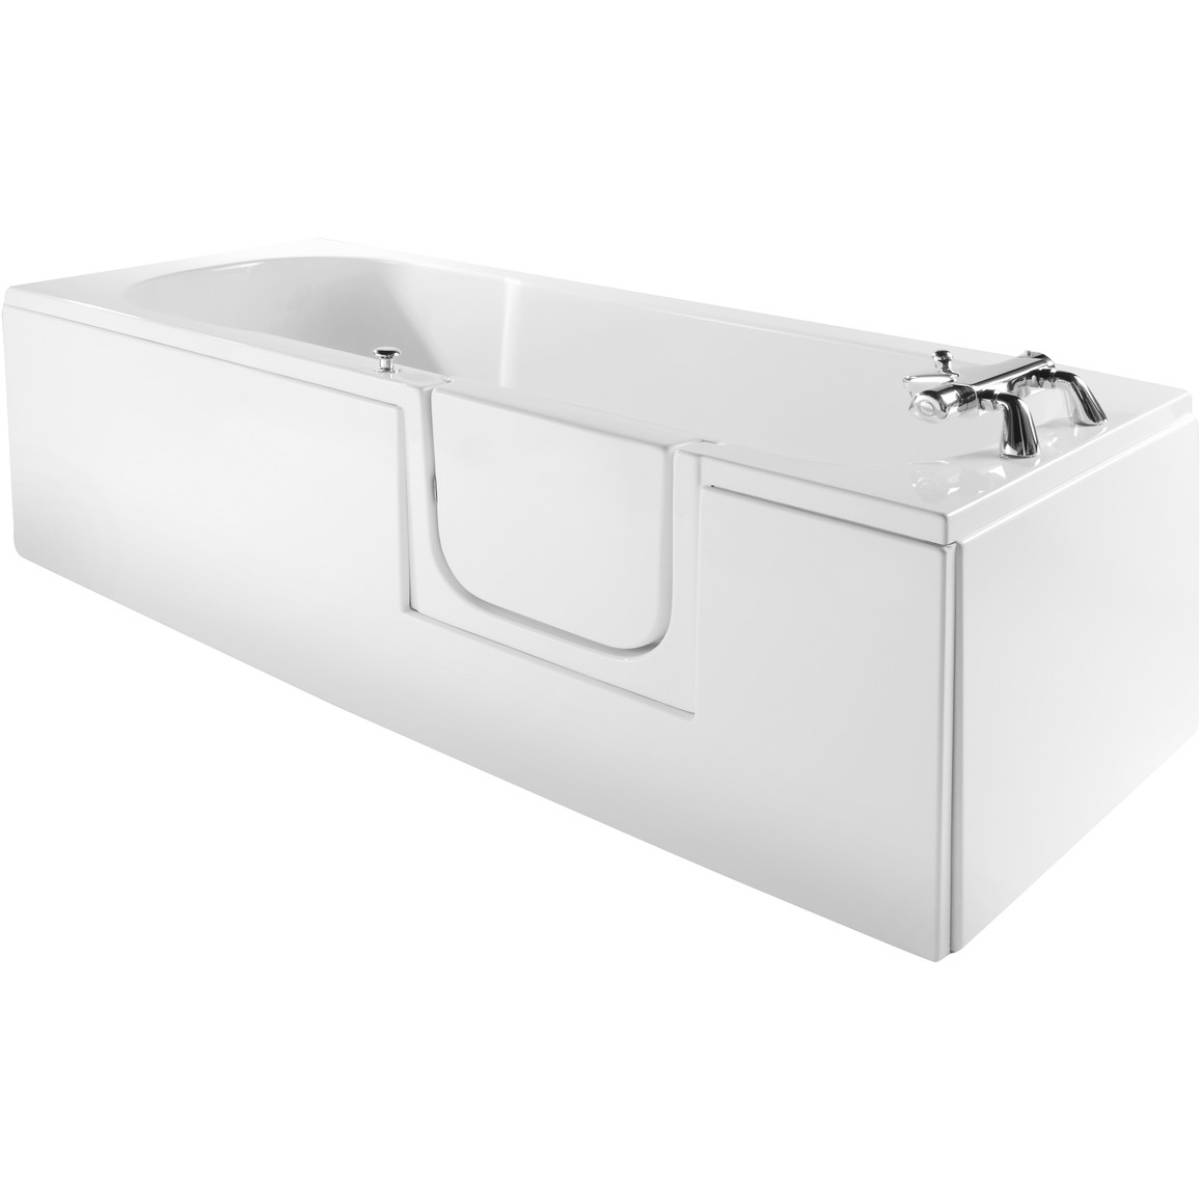 Moods Bathrooms to Love Easy Access 1690 x 690mm Walk-In Single Ended Bath - Right Hand (14647)